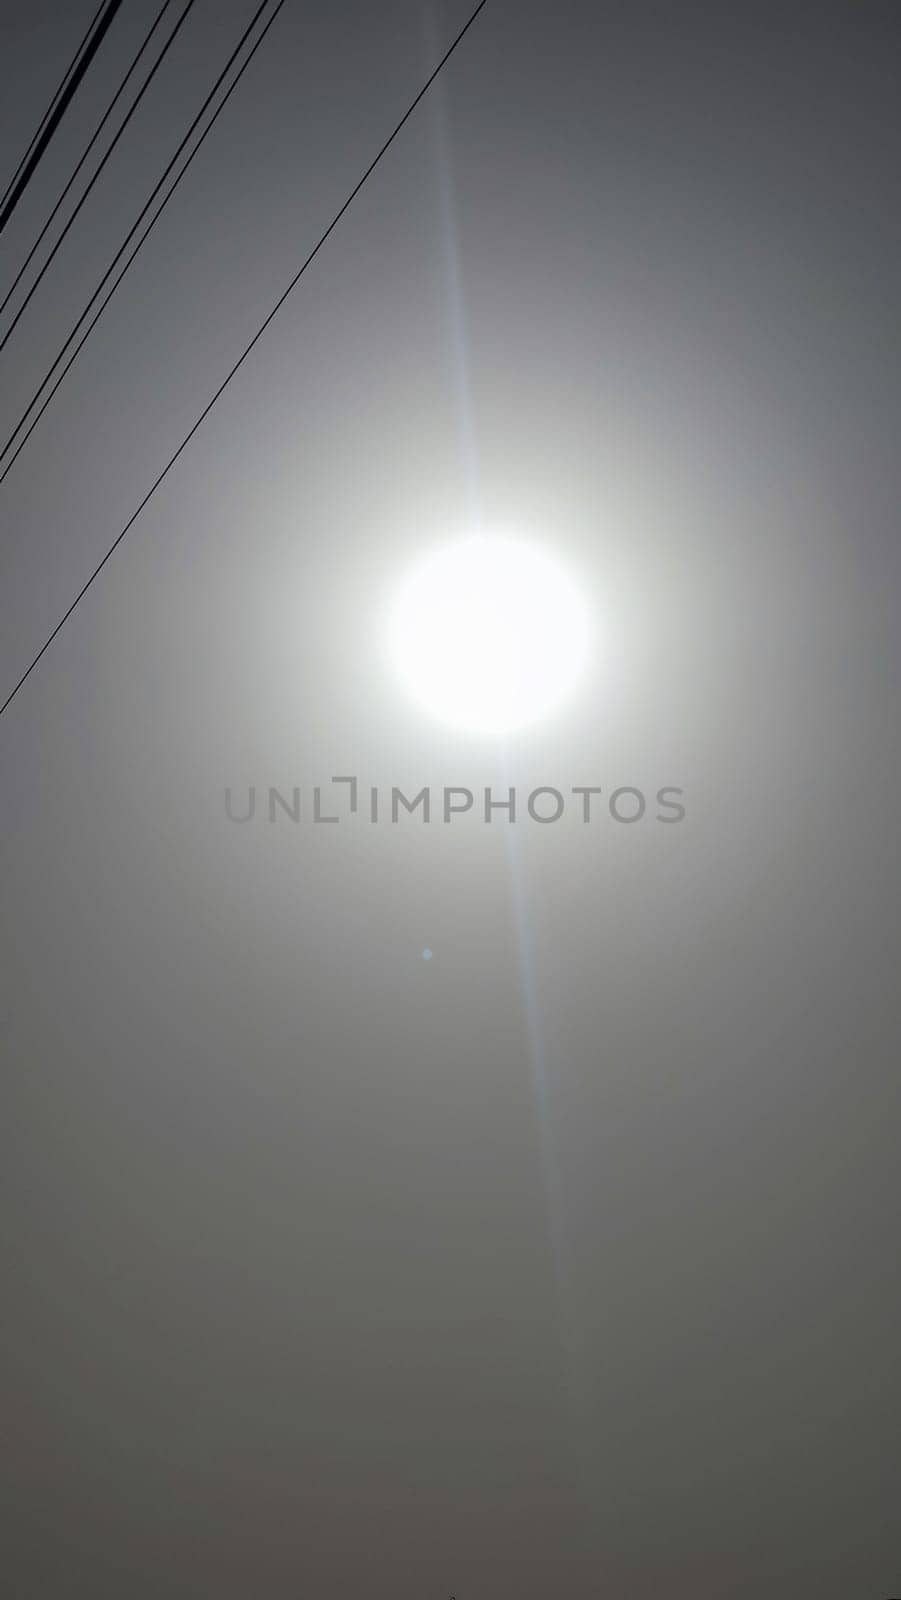 white sun in gray sky, weather background. High quality photo